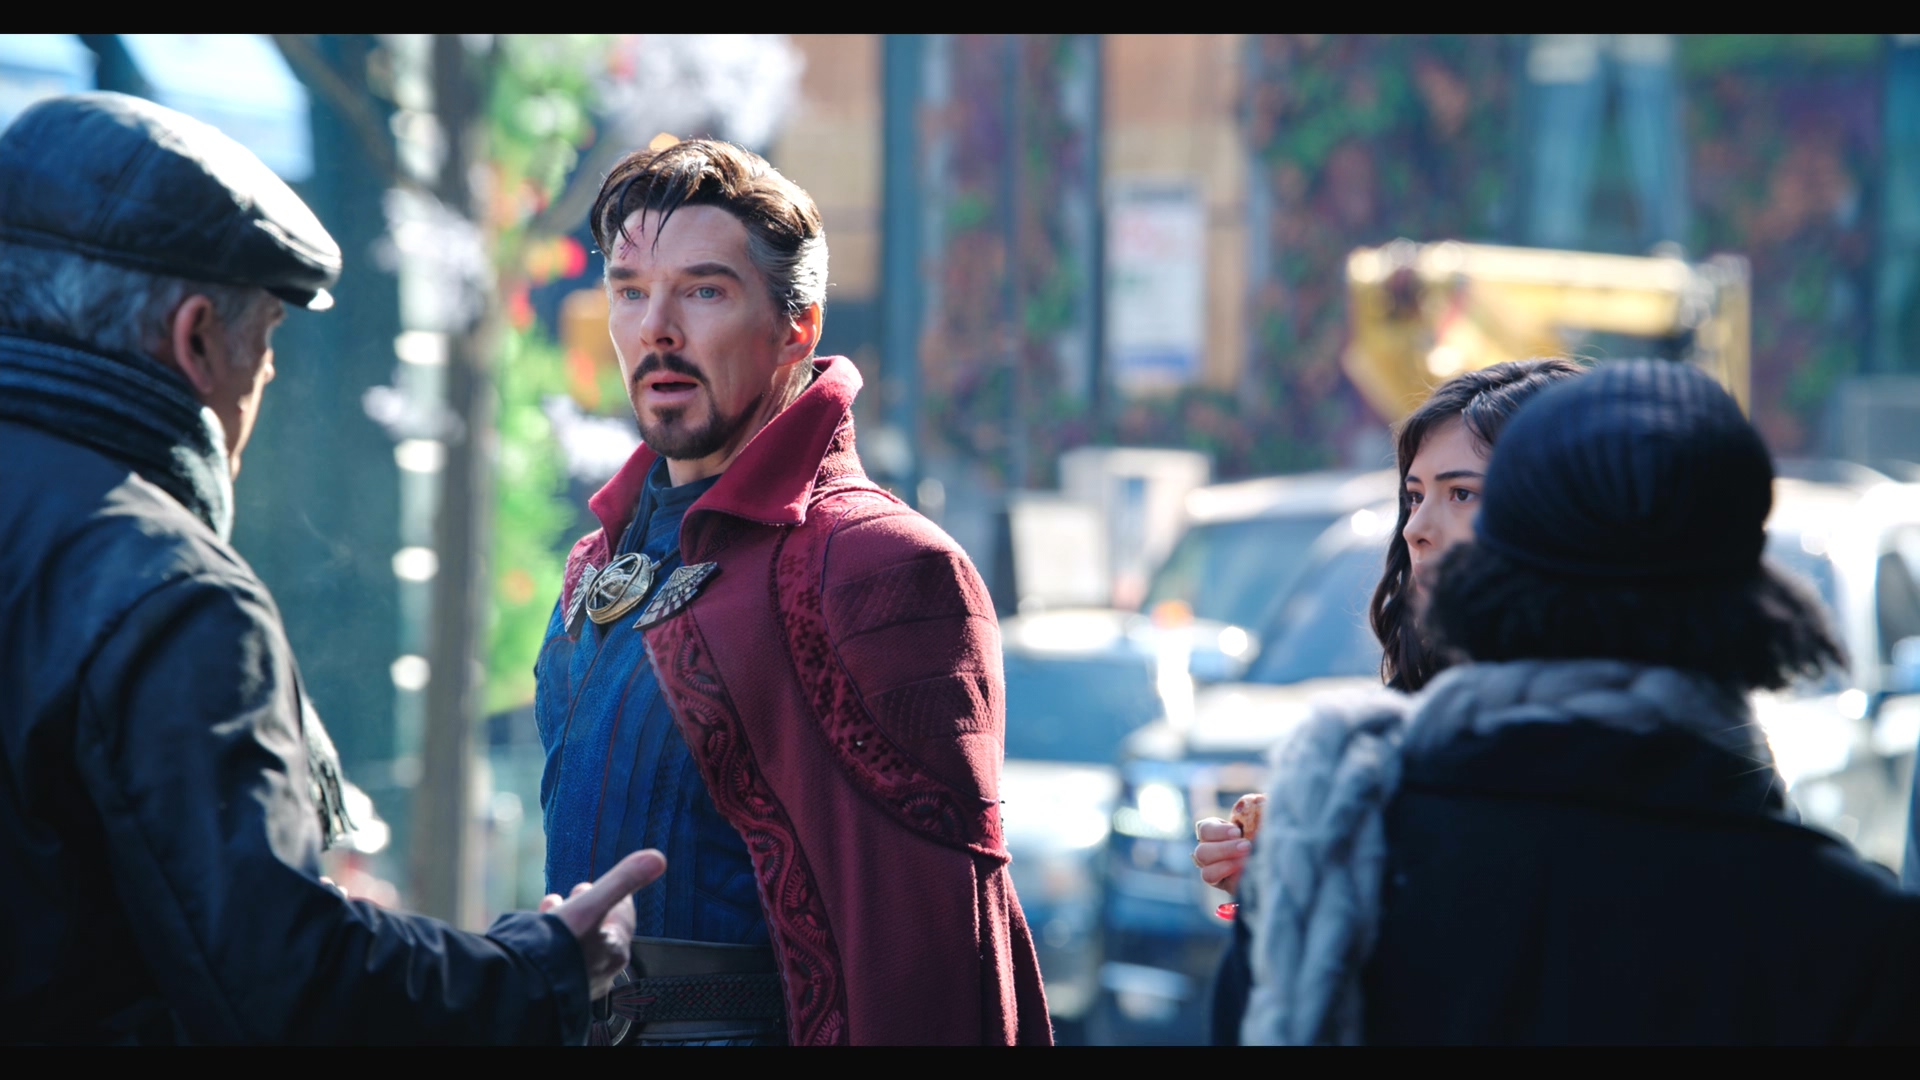 Doctor.Strange.in.the.Multiverse.of.Madness.2022.IMAX.1080p.NewComers.mkv_20220624_160107.664.jpg